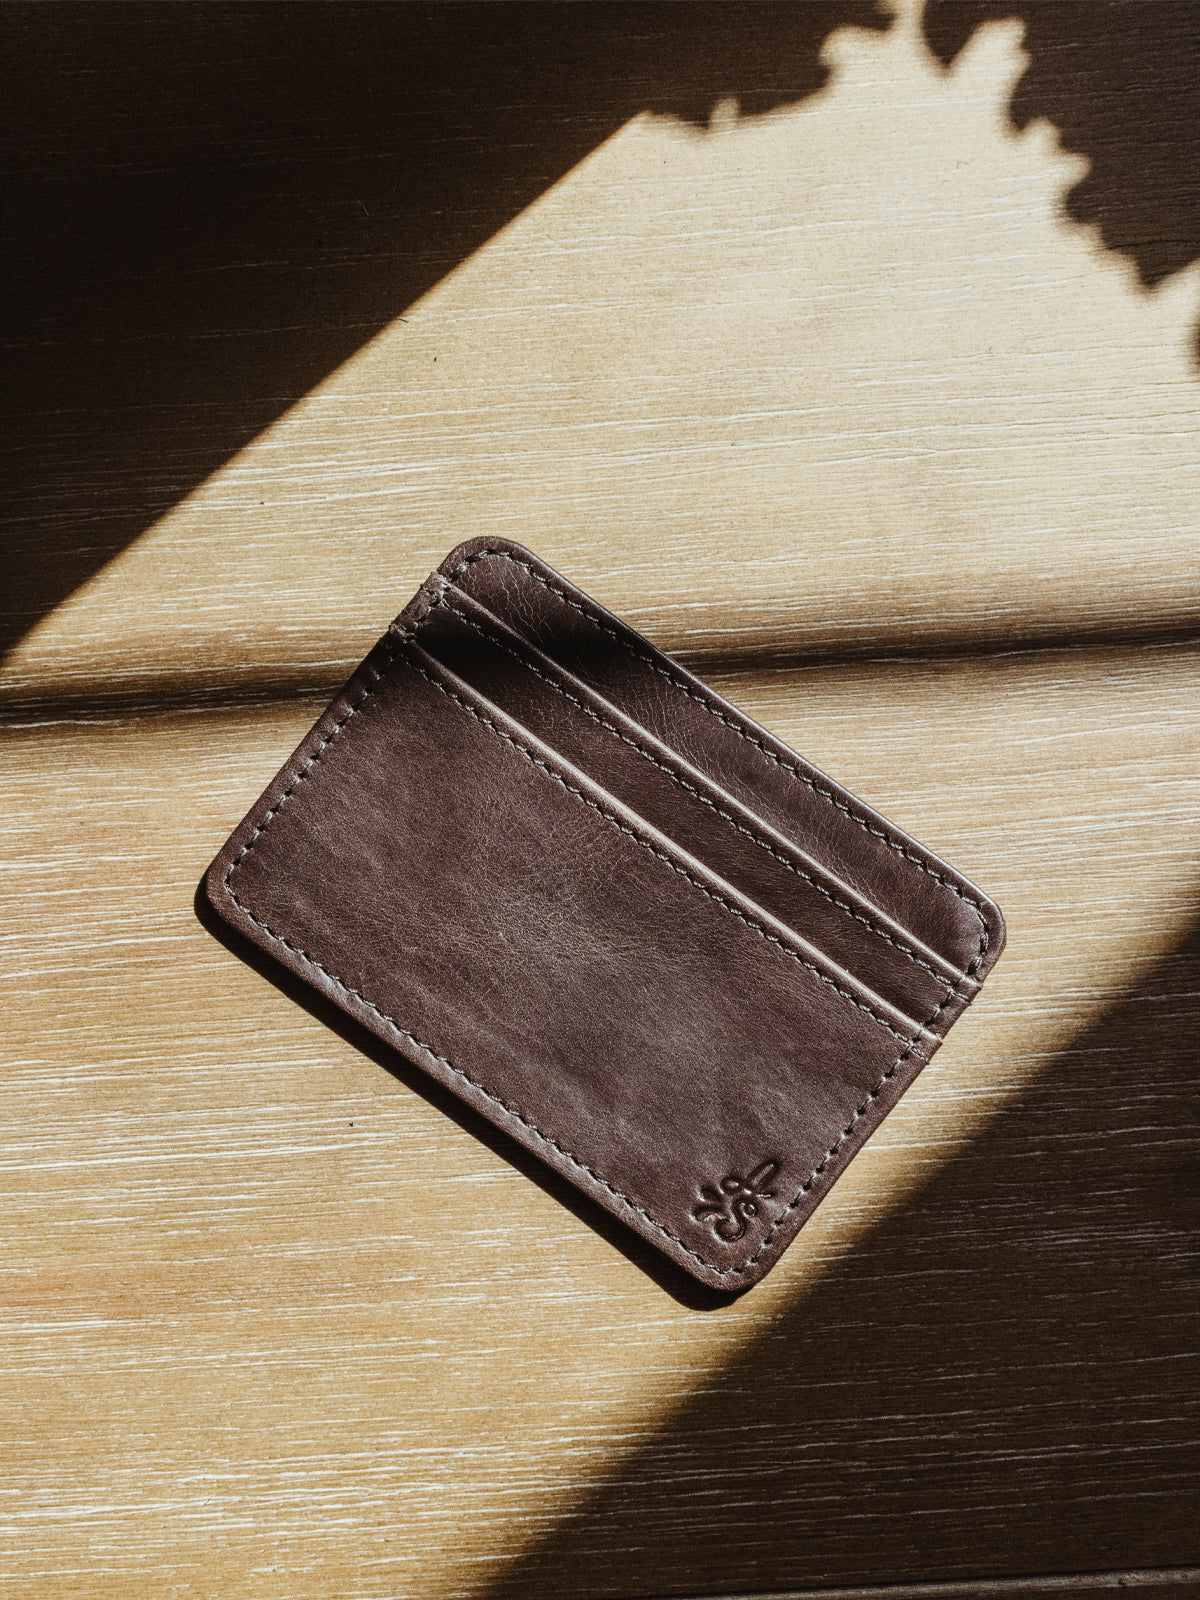 Dark brown minimalistic wallet. Product is on a wood surface.